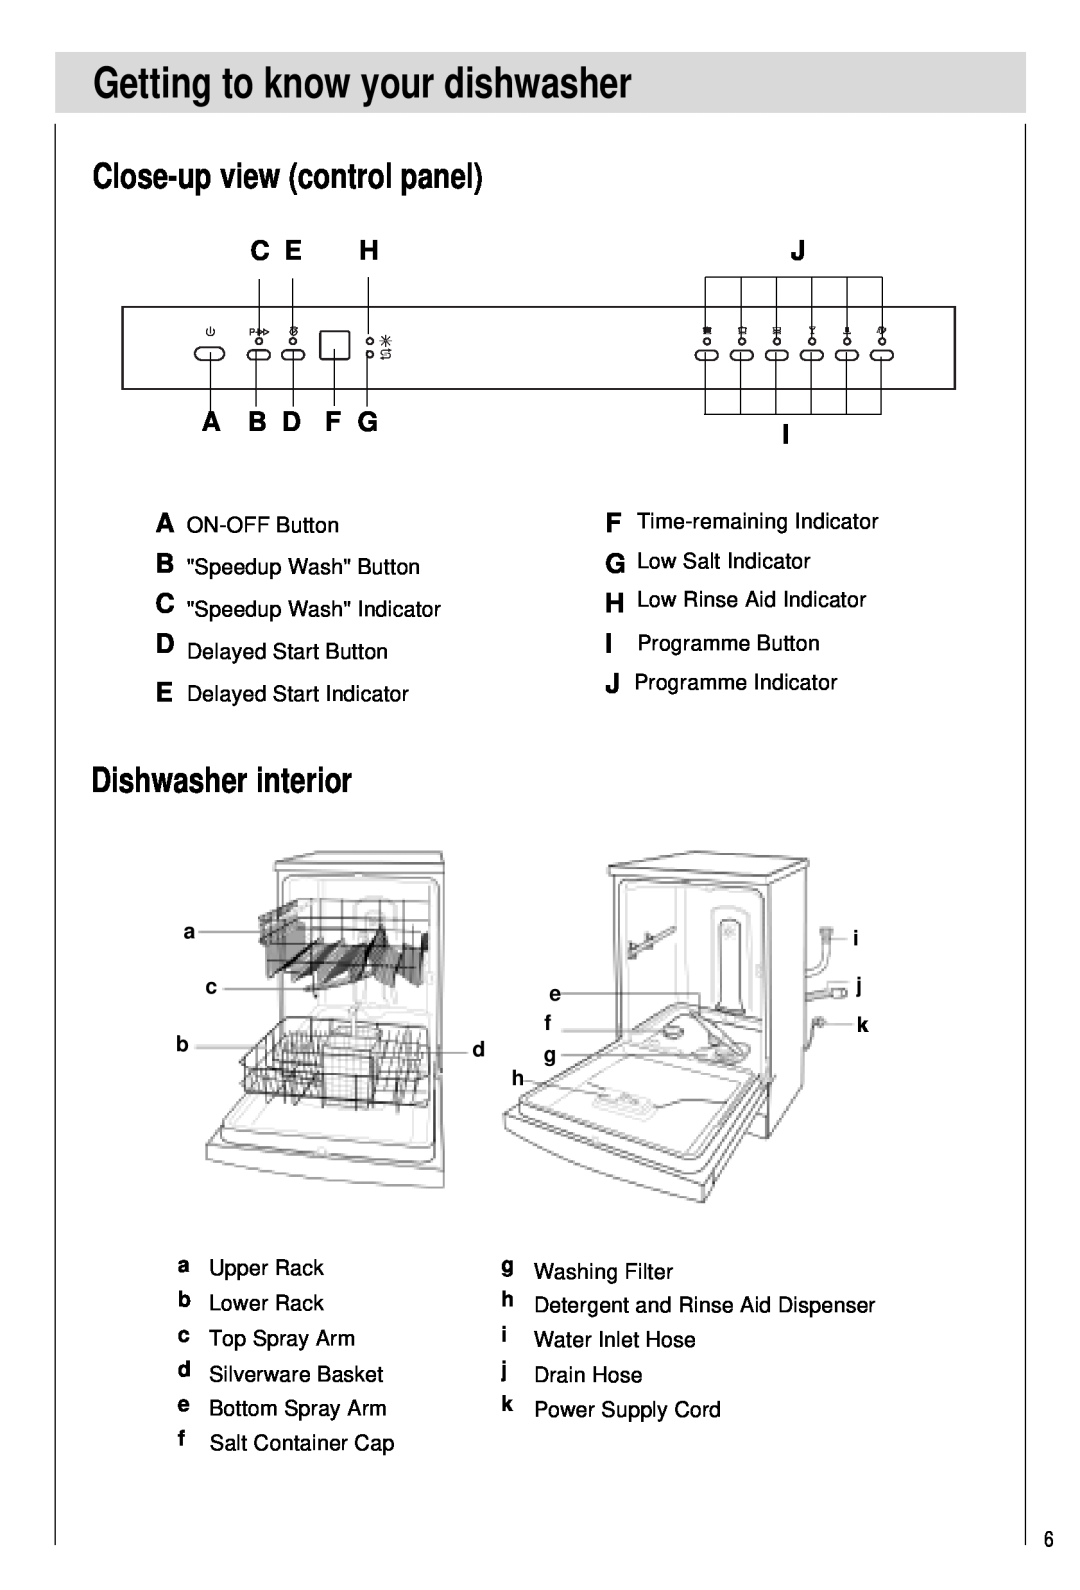 Haier DW12-PFE2ME-U Getting to know your dishwasher, Close-up view control panel, Dishwasher interior, C E Hj, A B D F G 